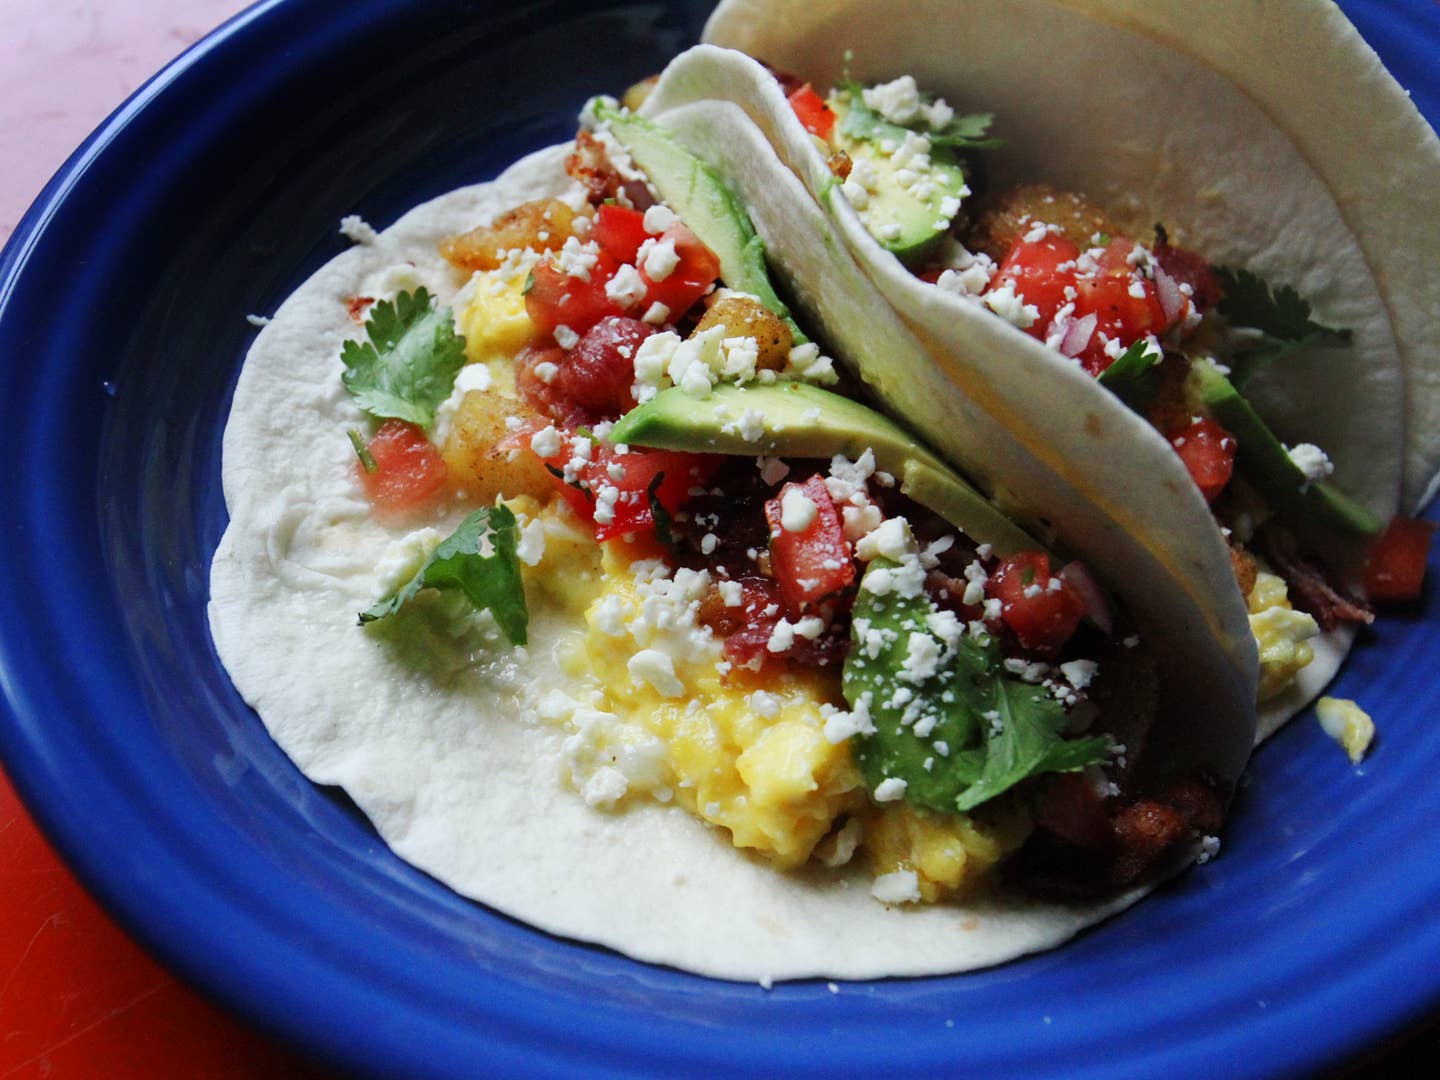 How to Make Your Own Breakfast Tacos